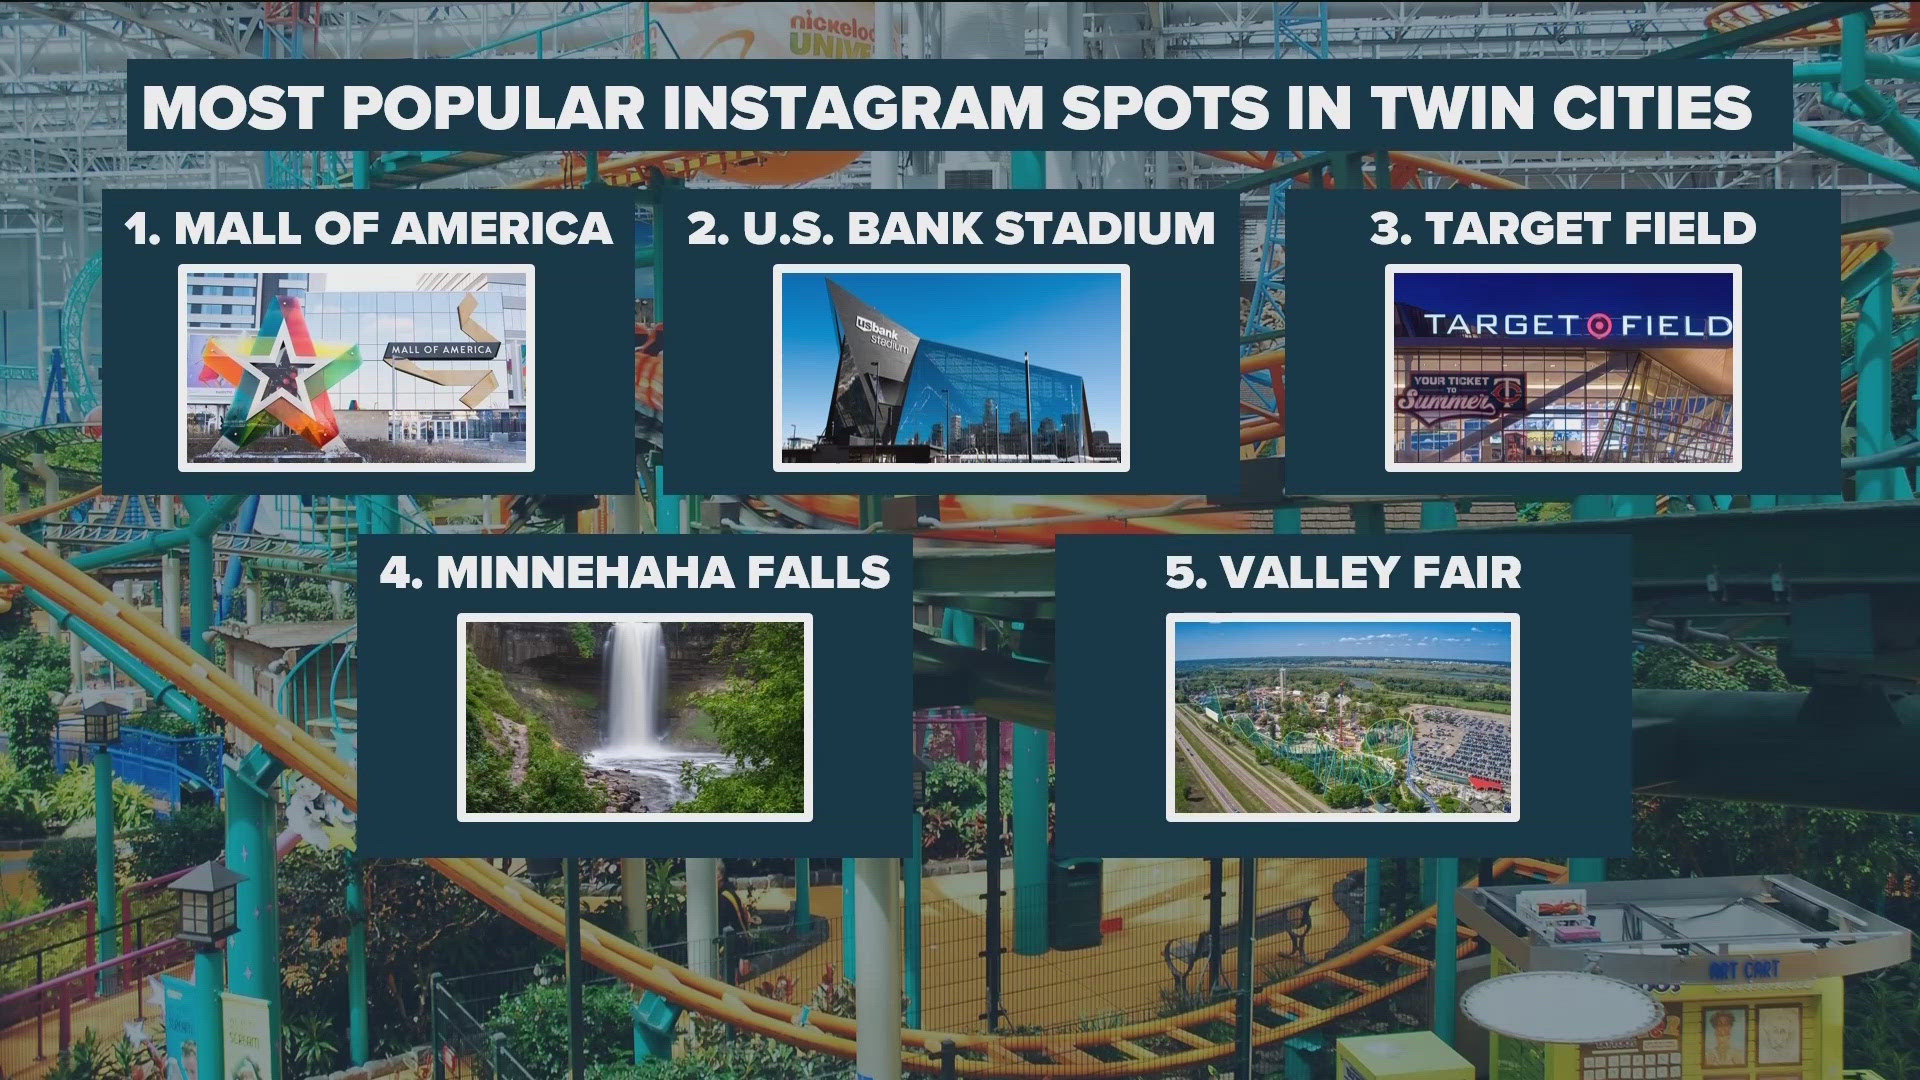 According to data comparing Instagram hashtags for more than 2,700 landmarks across the United States, in Minnesota, posts from MOA topped the list.